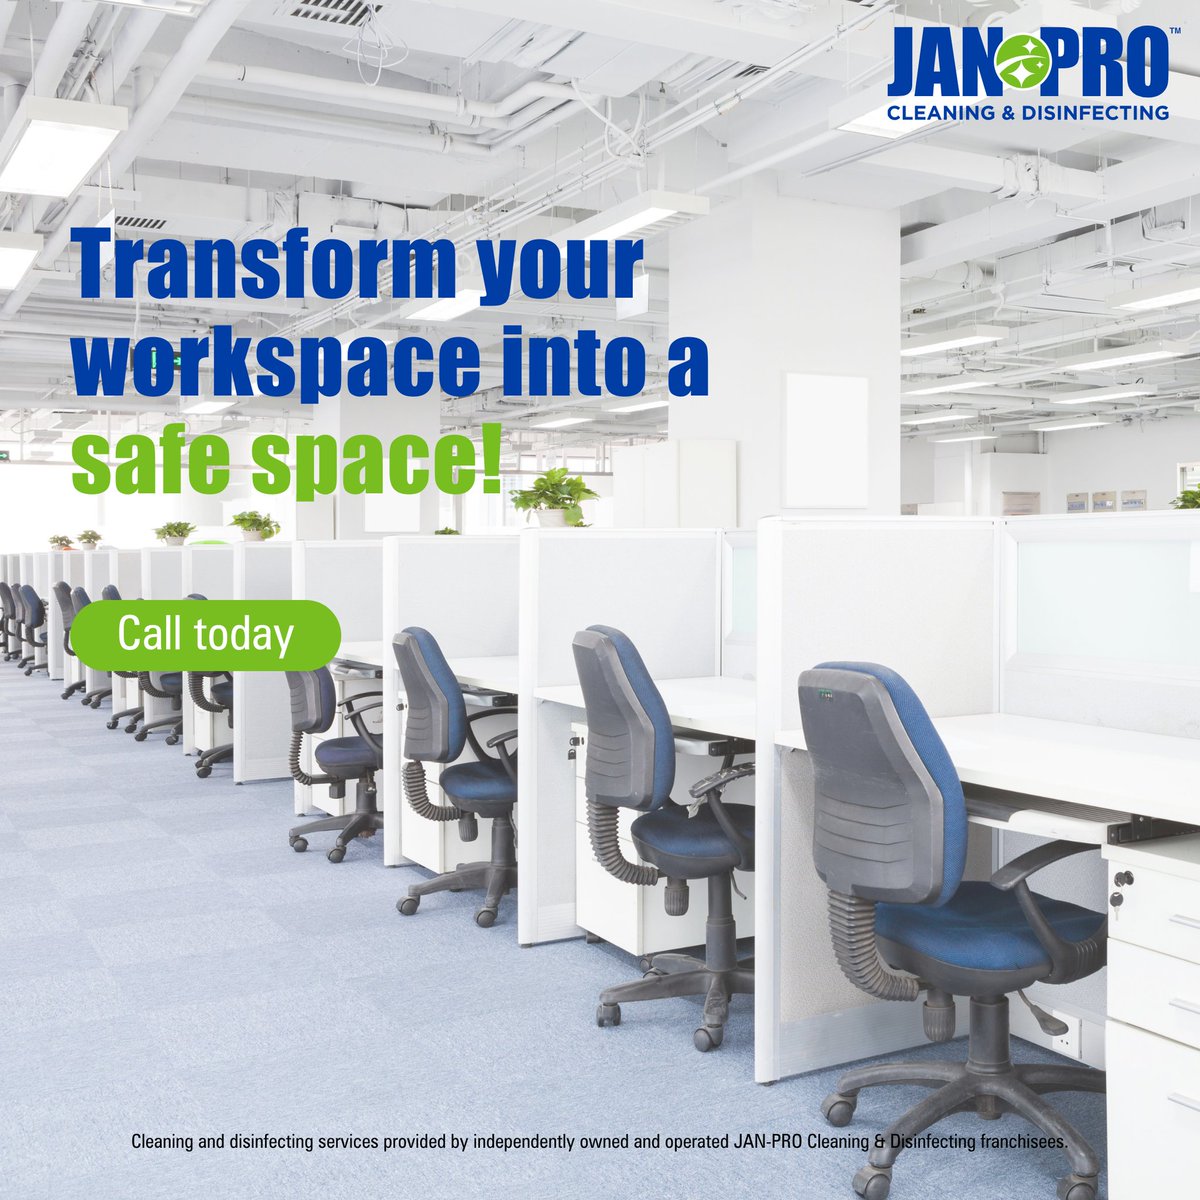 Say goodbye to germs and welcome a safe and clean workspace with JAN-PRO Cleaning & Disinfecting!

#commercialcleaning #janitorialservices #businesscleaning #northeastwisconsin  #janpro #janproinNortheastWisconsin #business #EnviroShield #GreenCleaning